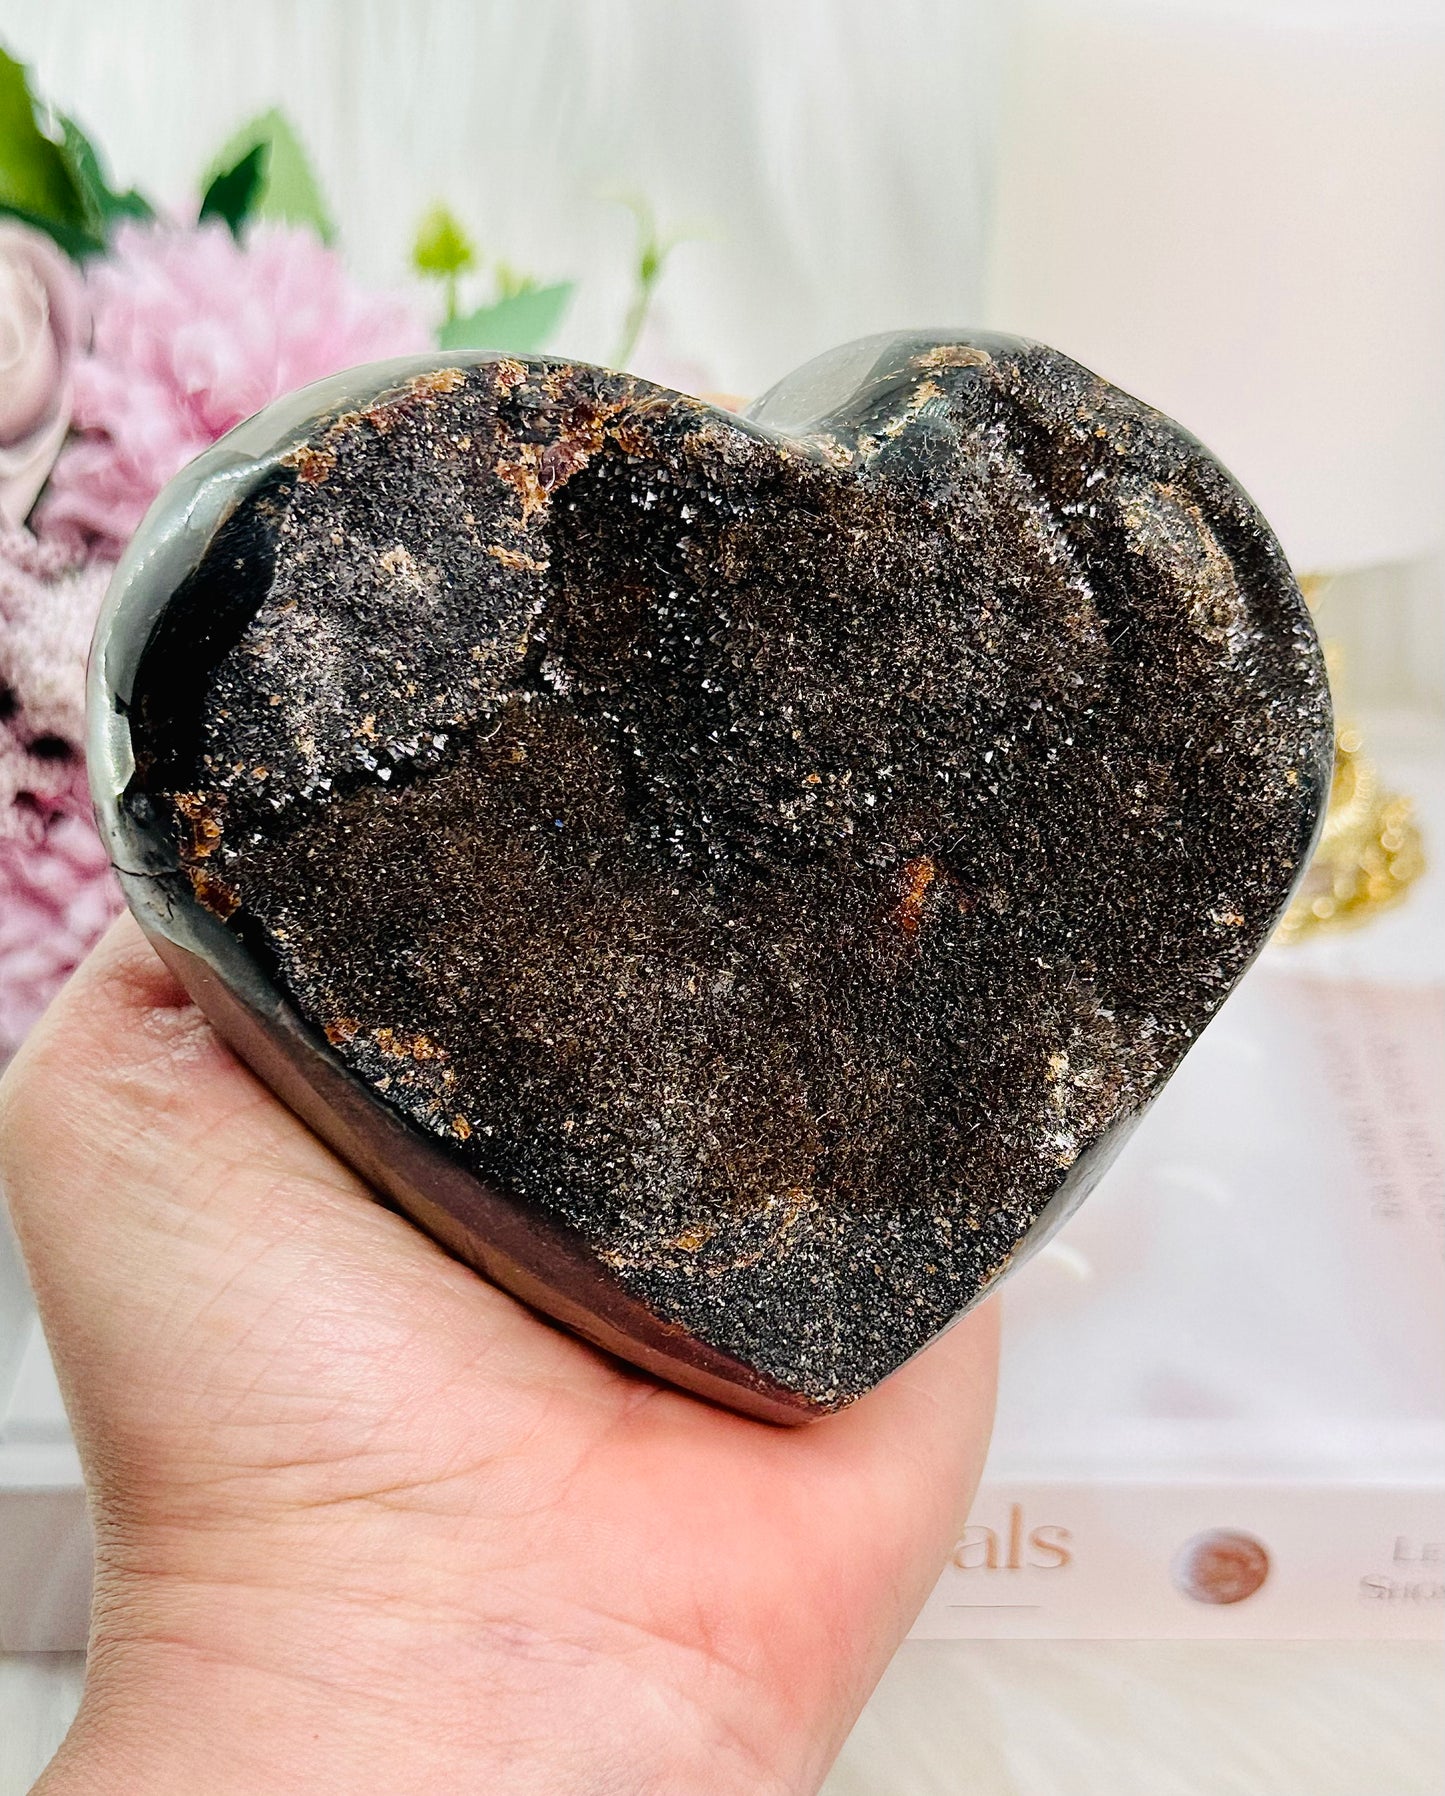 ⚜️ SALE ⚜️ A Nourishing & Calming Stone ~ Gorgeous Large 843gram Chunky Septarian Heart Carving